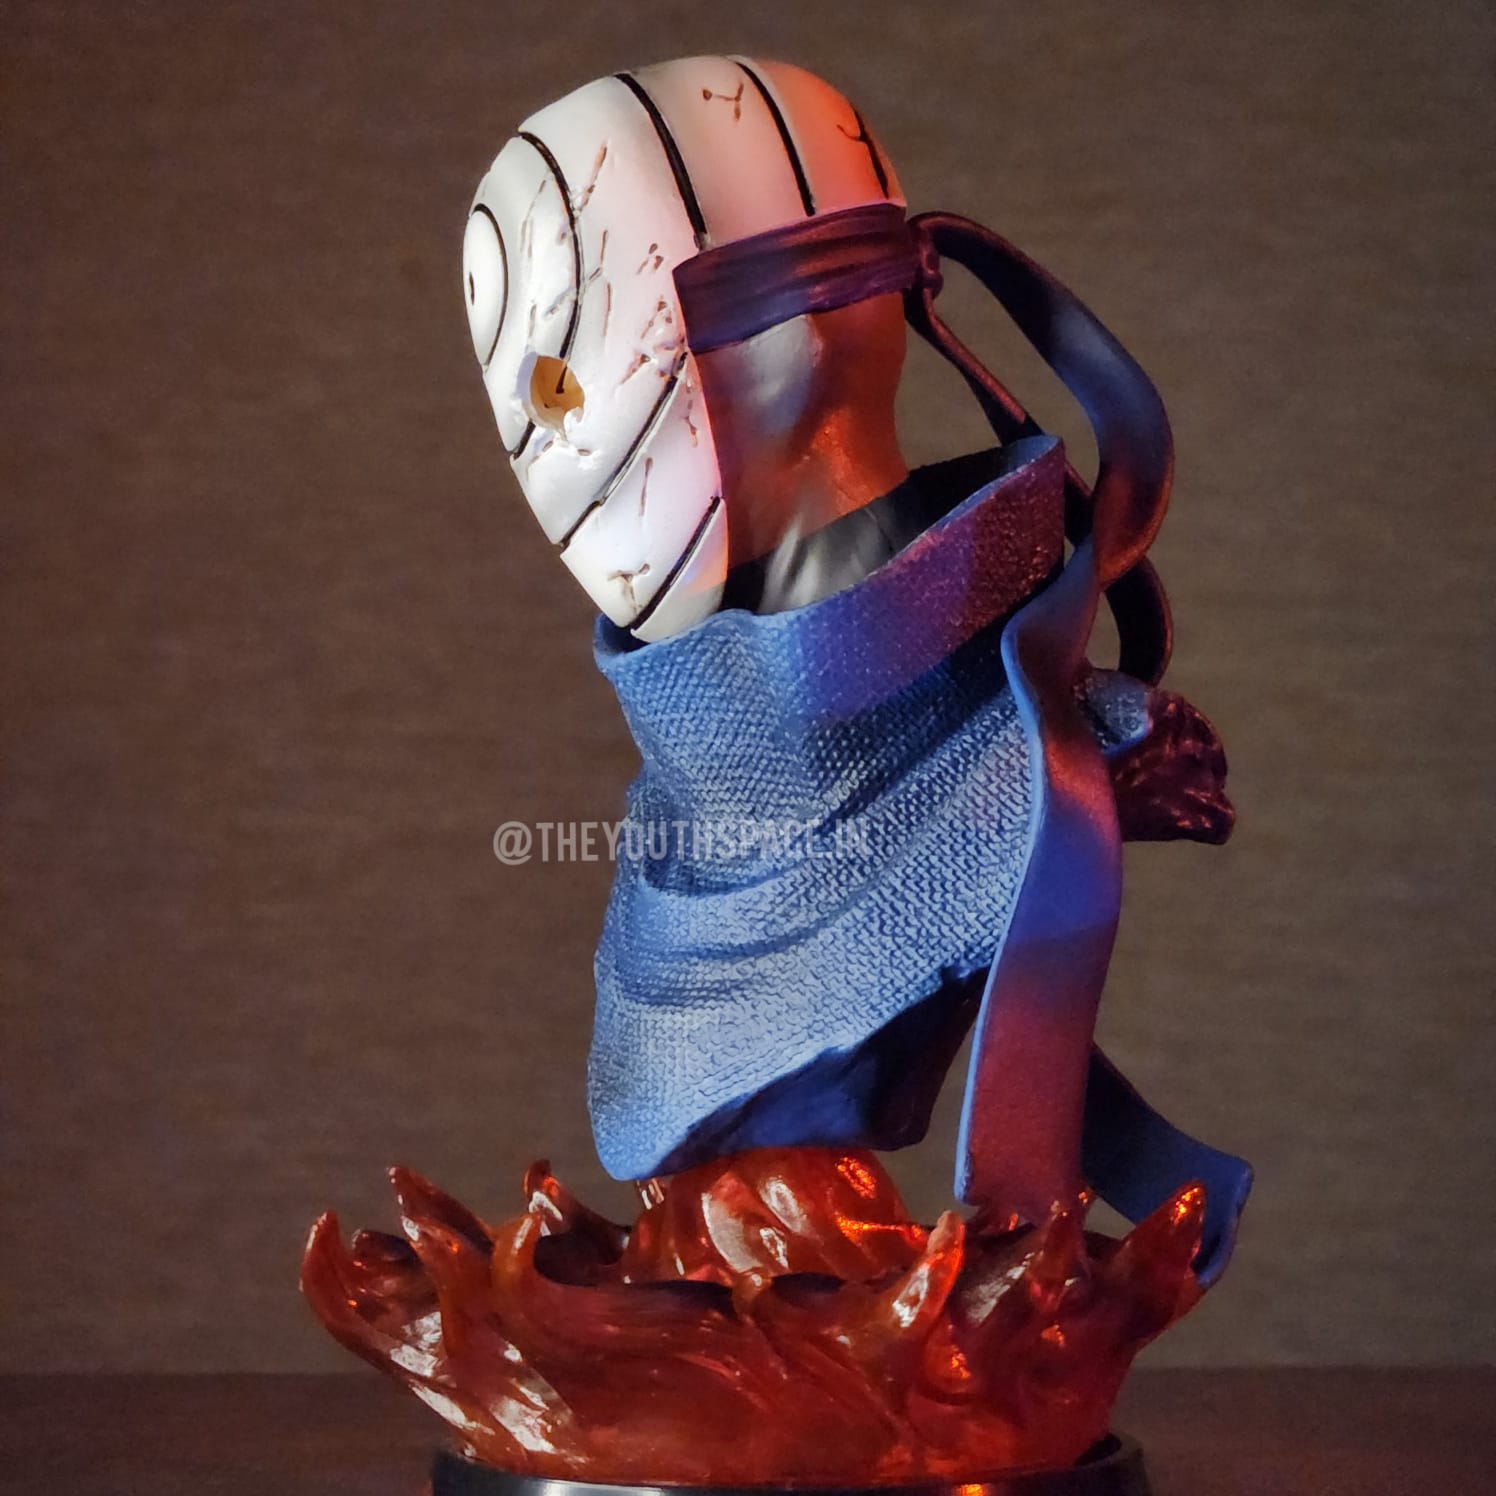 Obito Bust Figure in mask